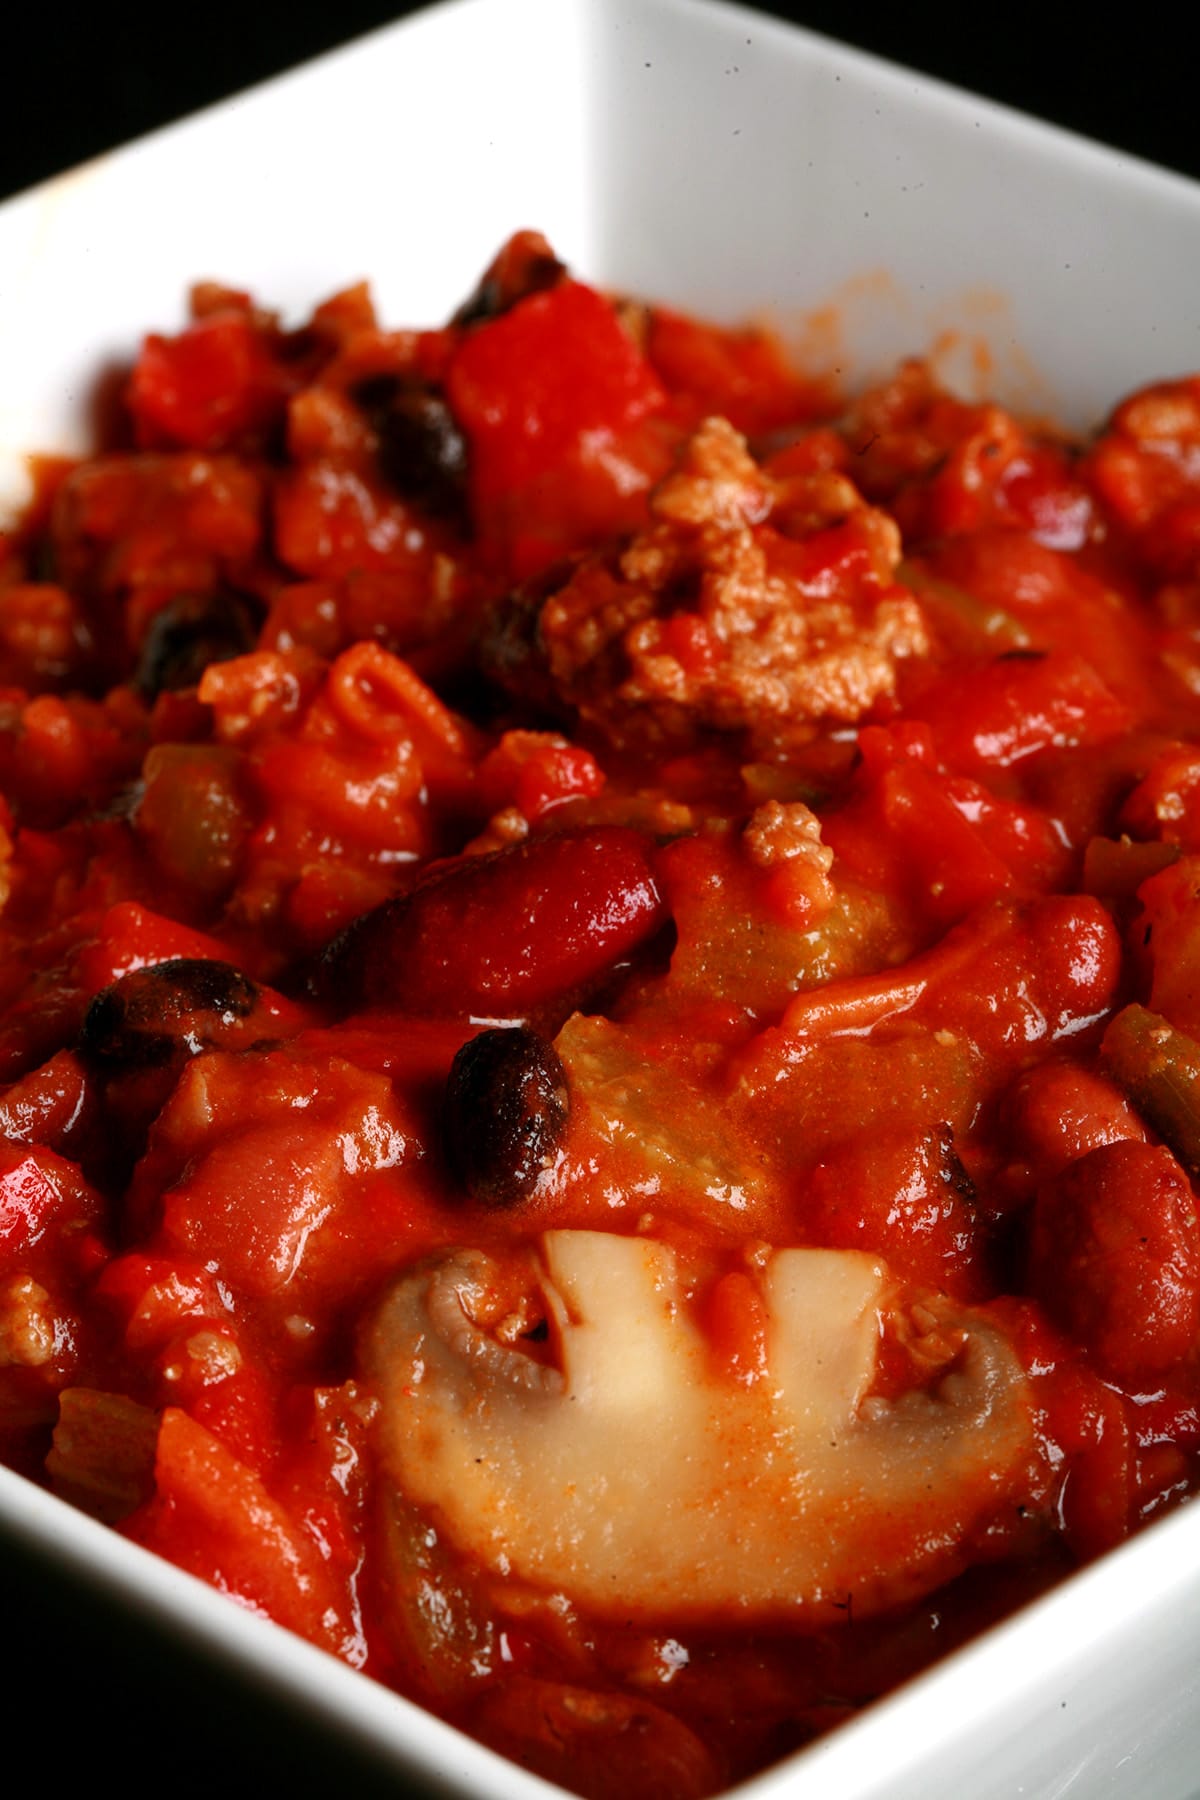 Close up photo of a bowl of chili. Kidney beans, ground beef, mushrooms, celery, and red peppers are visible.